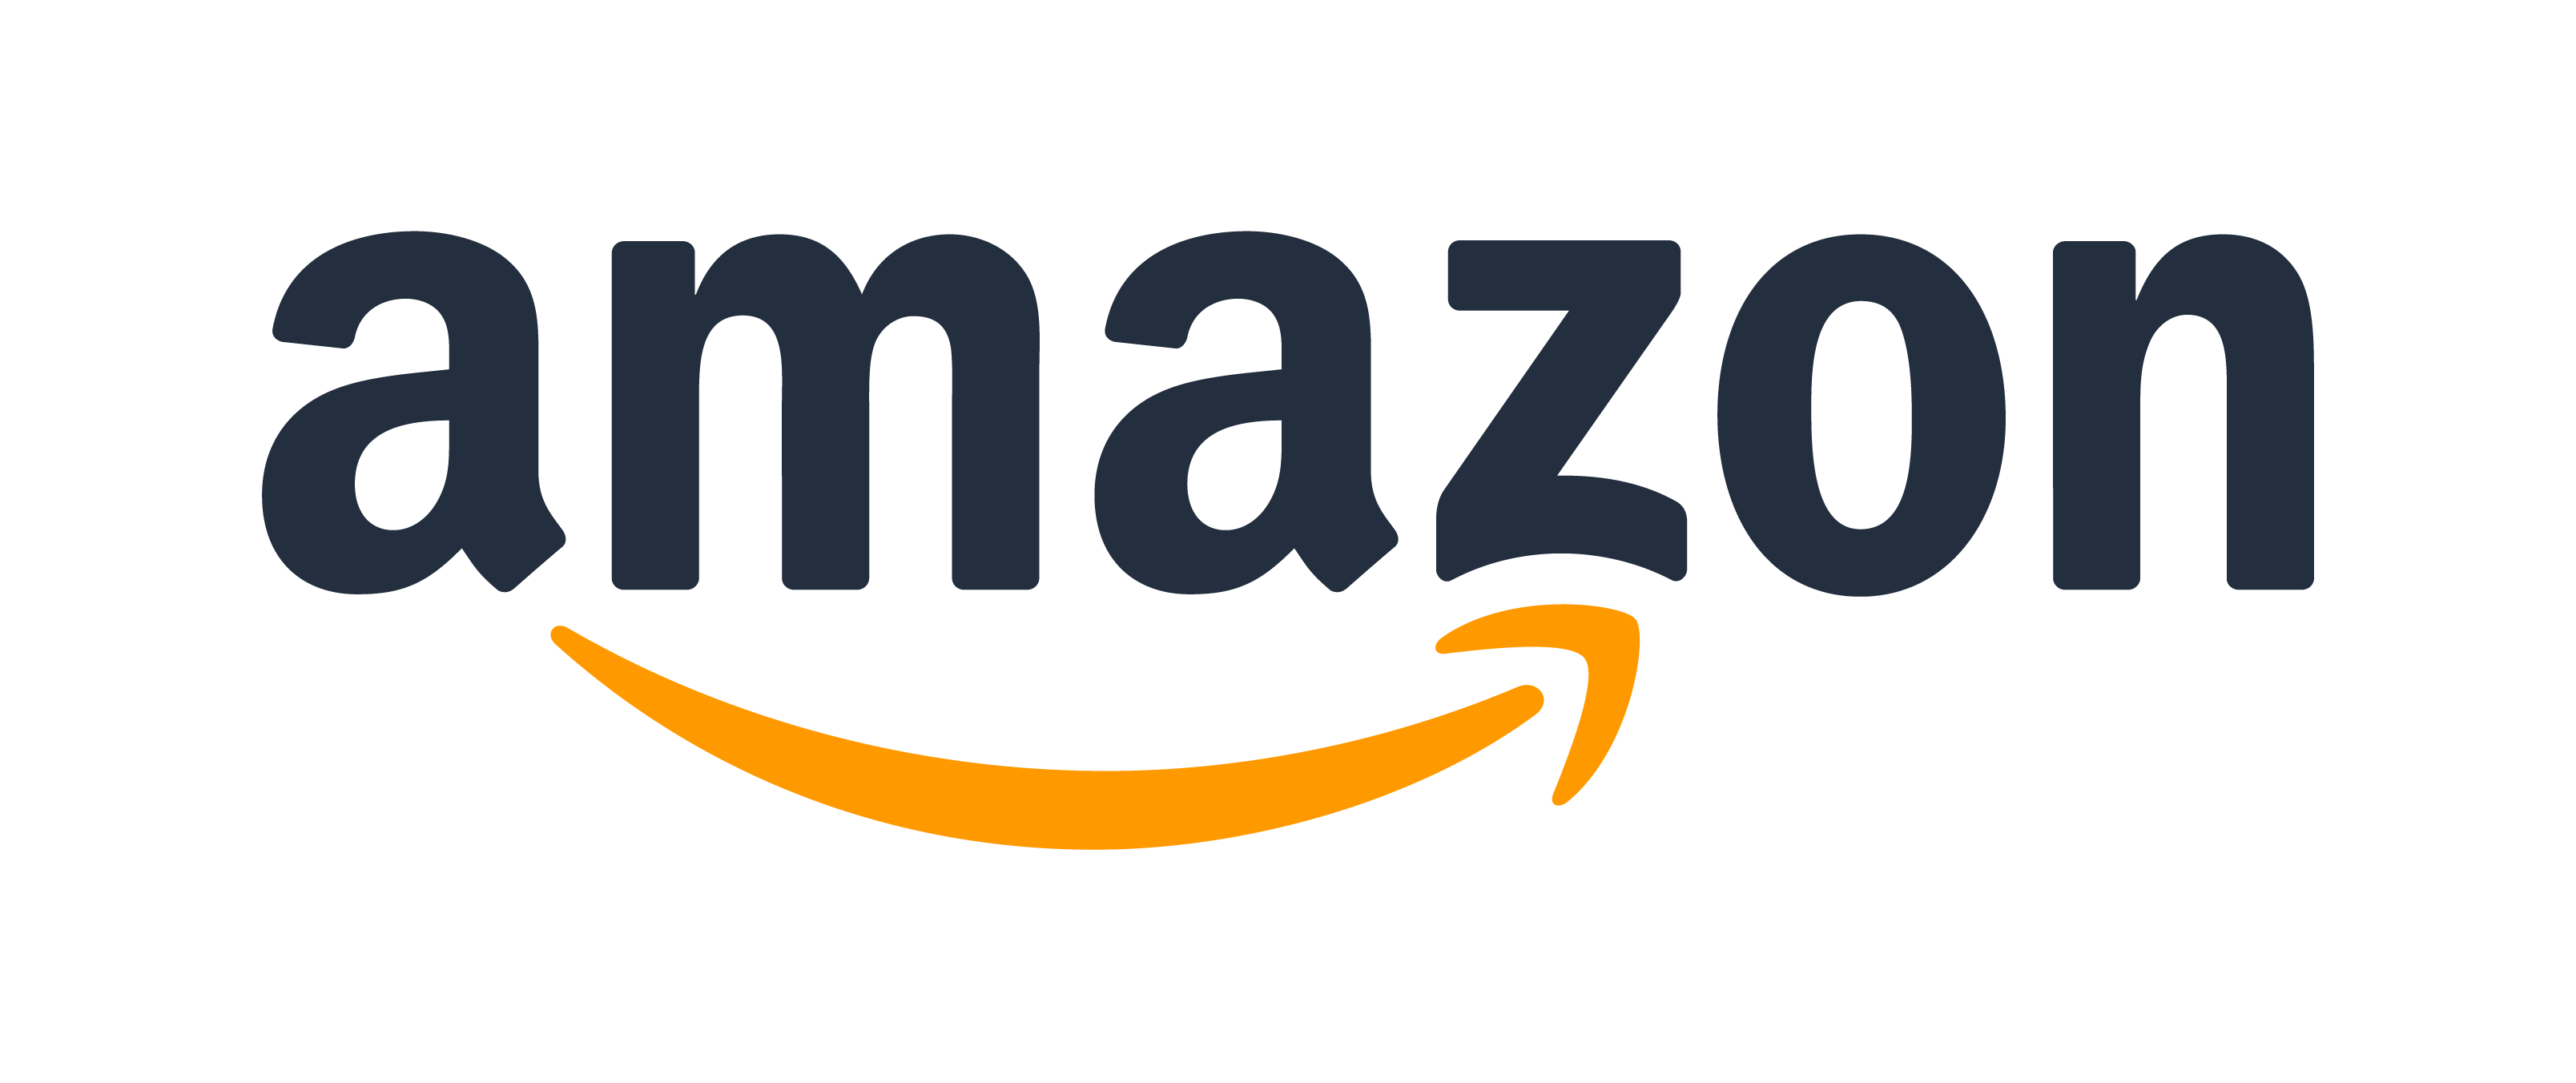 Images, videos and logos | Amazon India